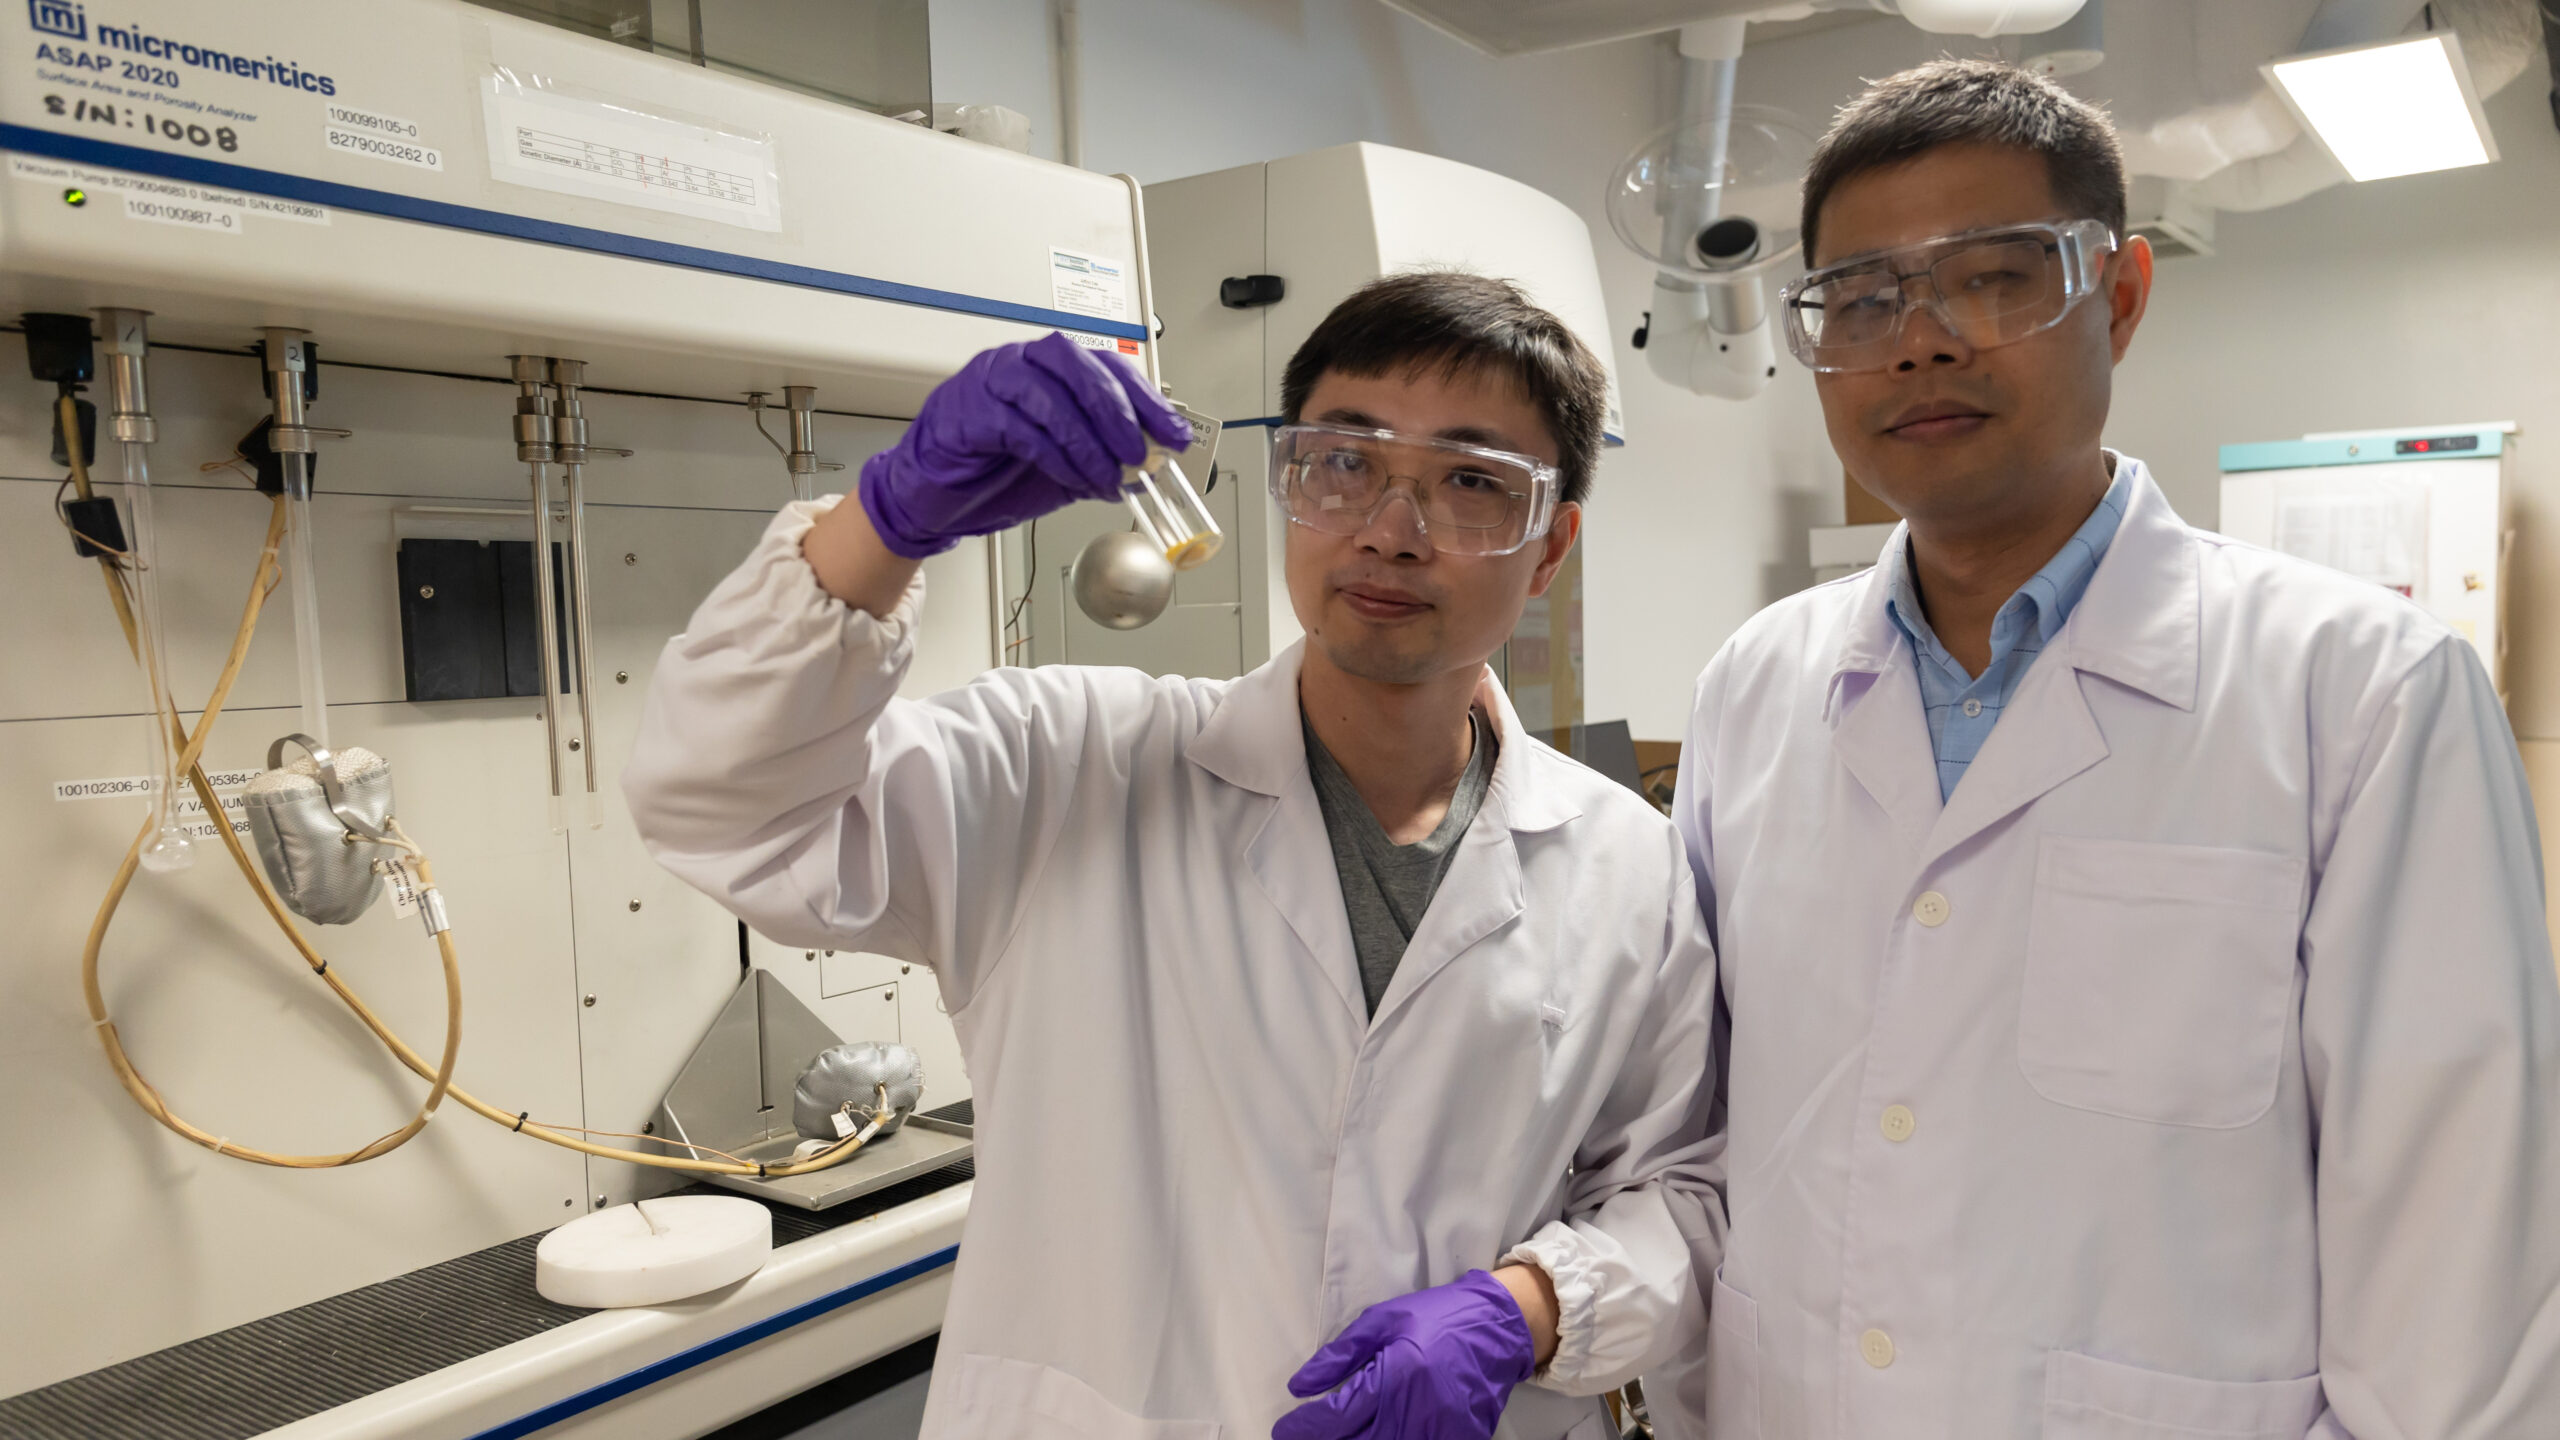 The researchers say the COF material has the potential to deliver a financial payback by enabling the production of commercial chemicals from the captured gas.